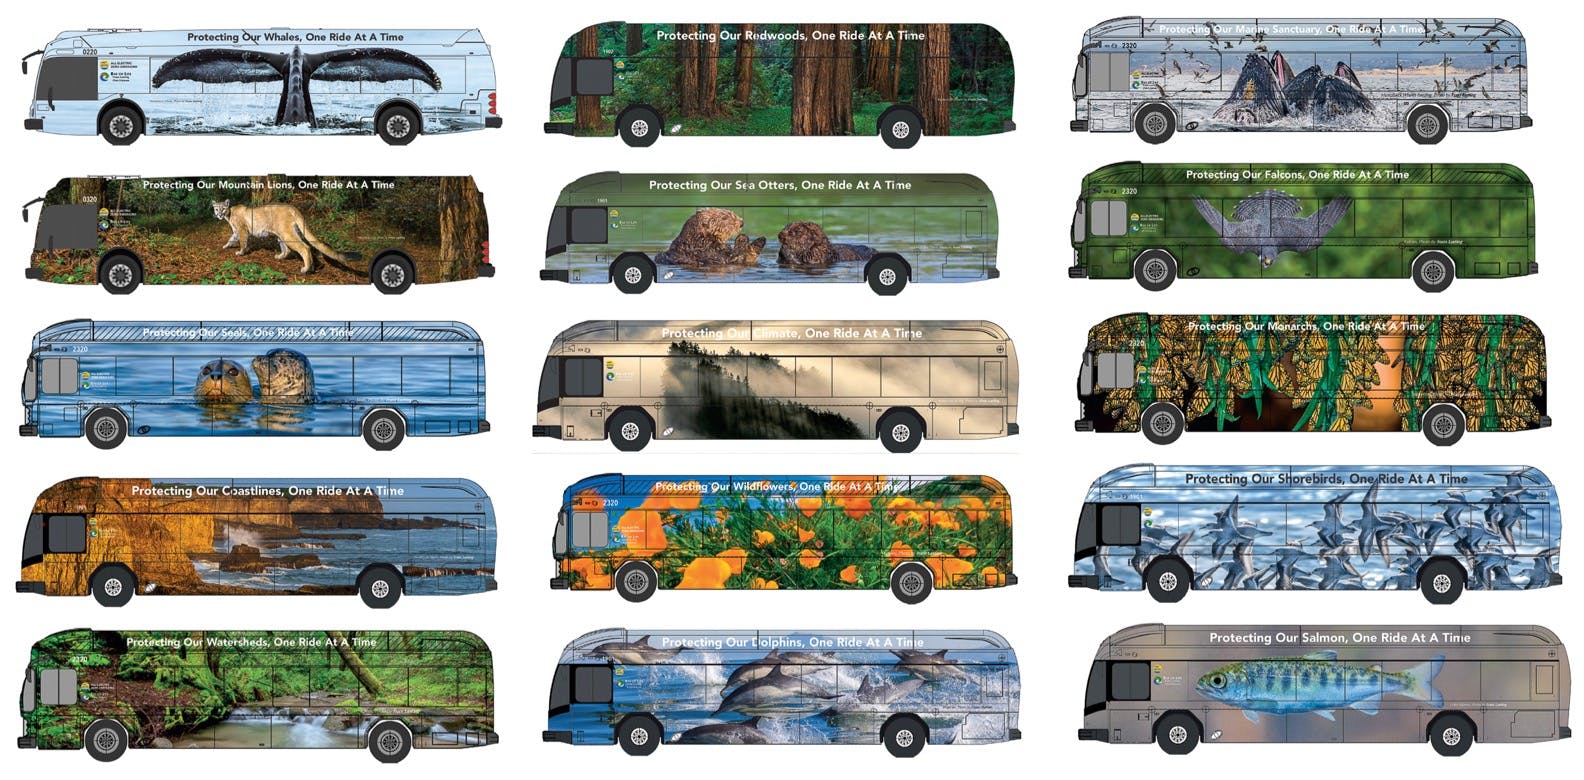 15 wallpaper designs for buses all with environmental themes